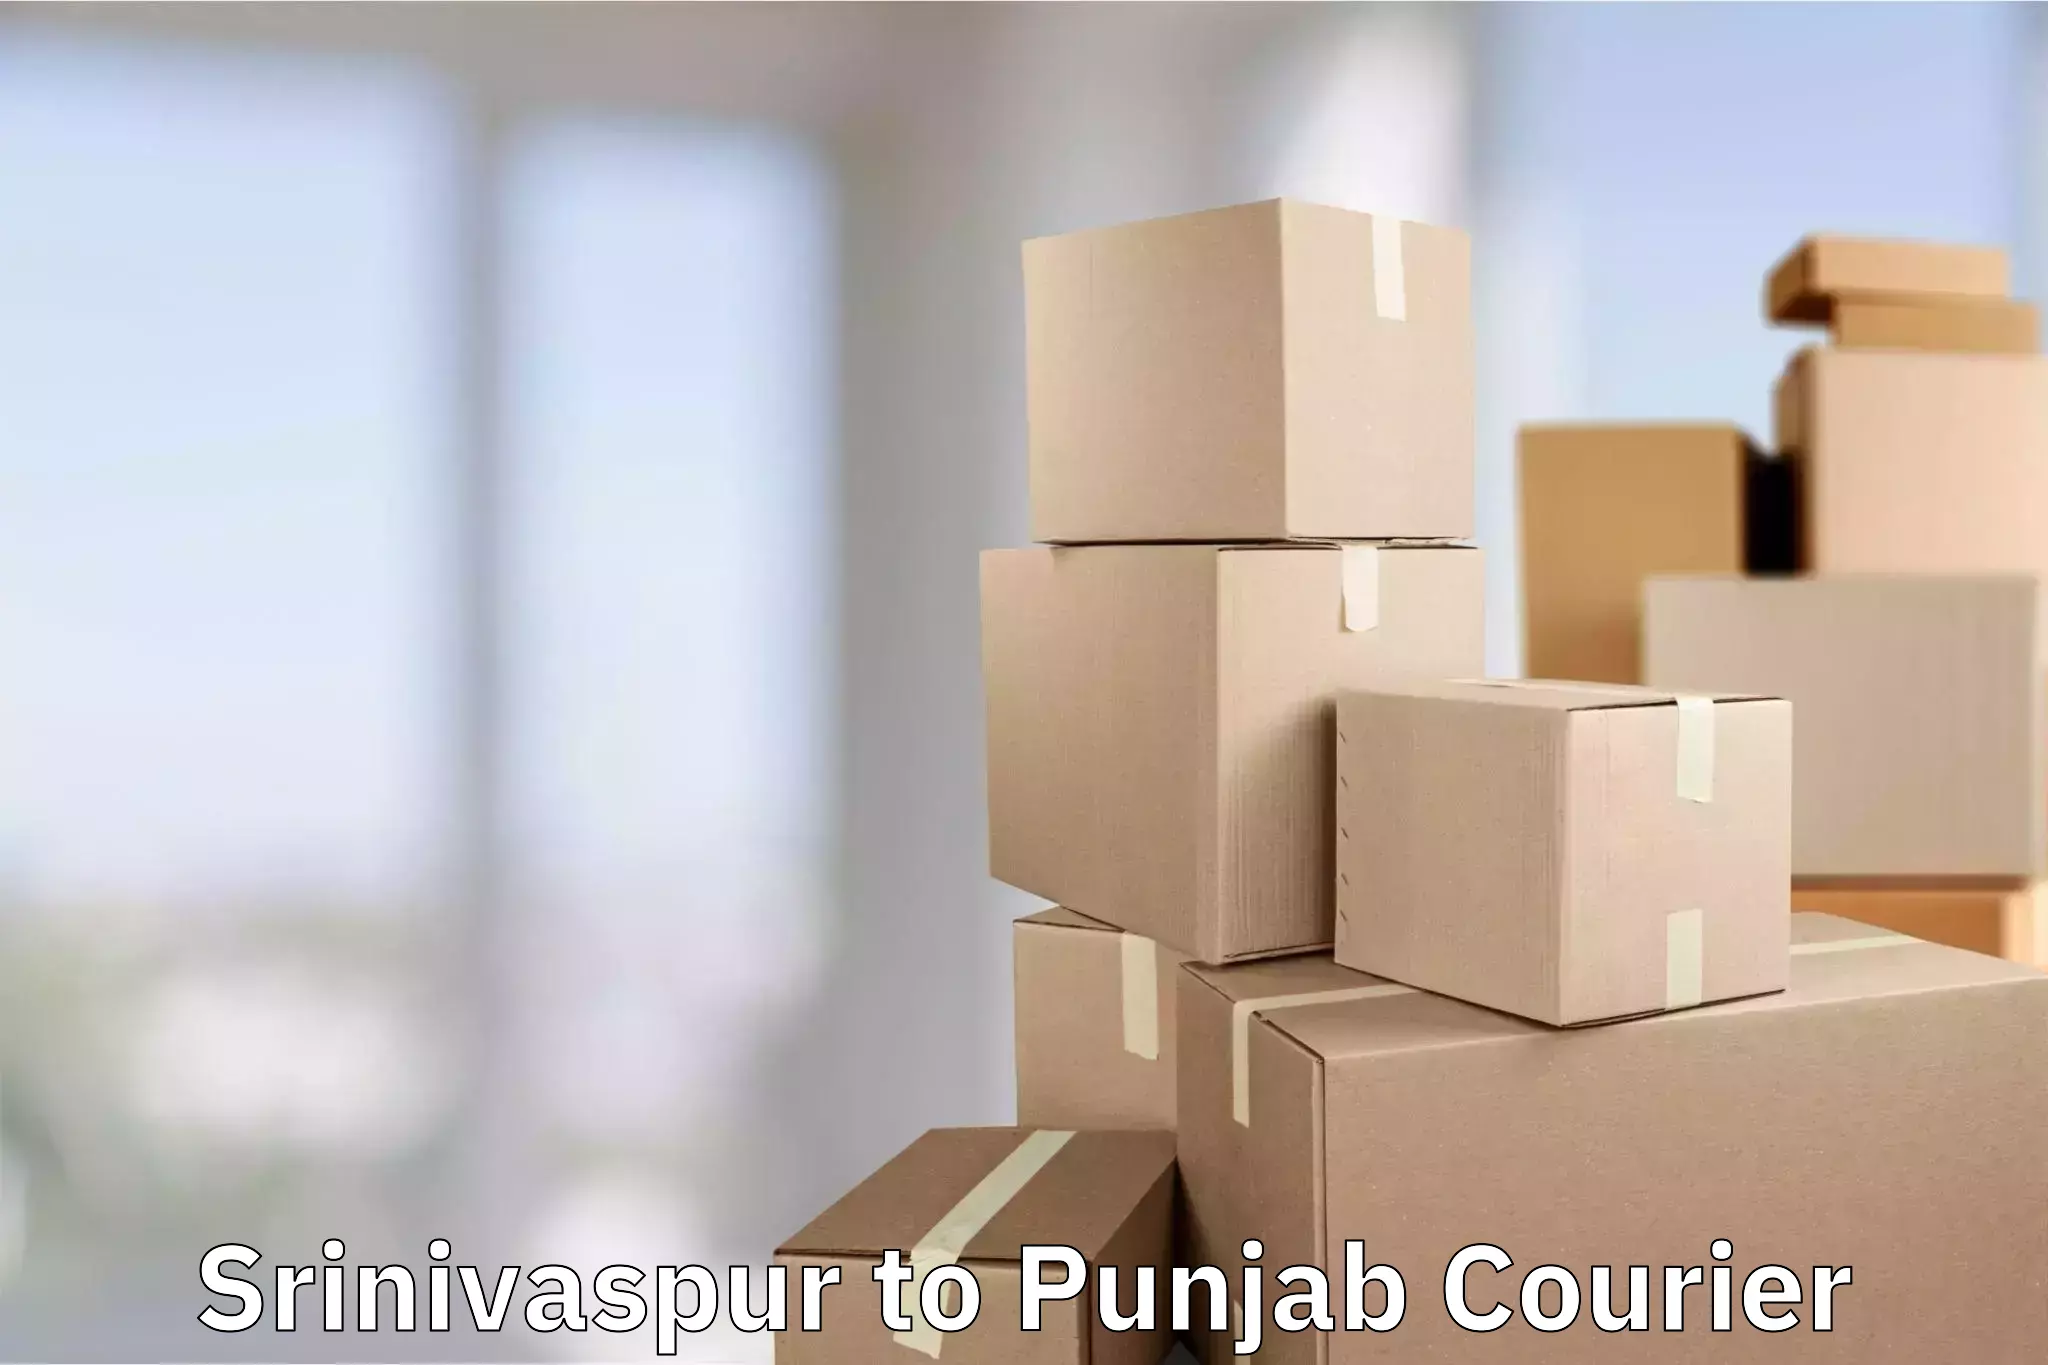 Luggage delivery solutions Srinivaspur to Punjab